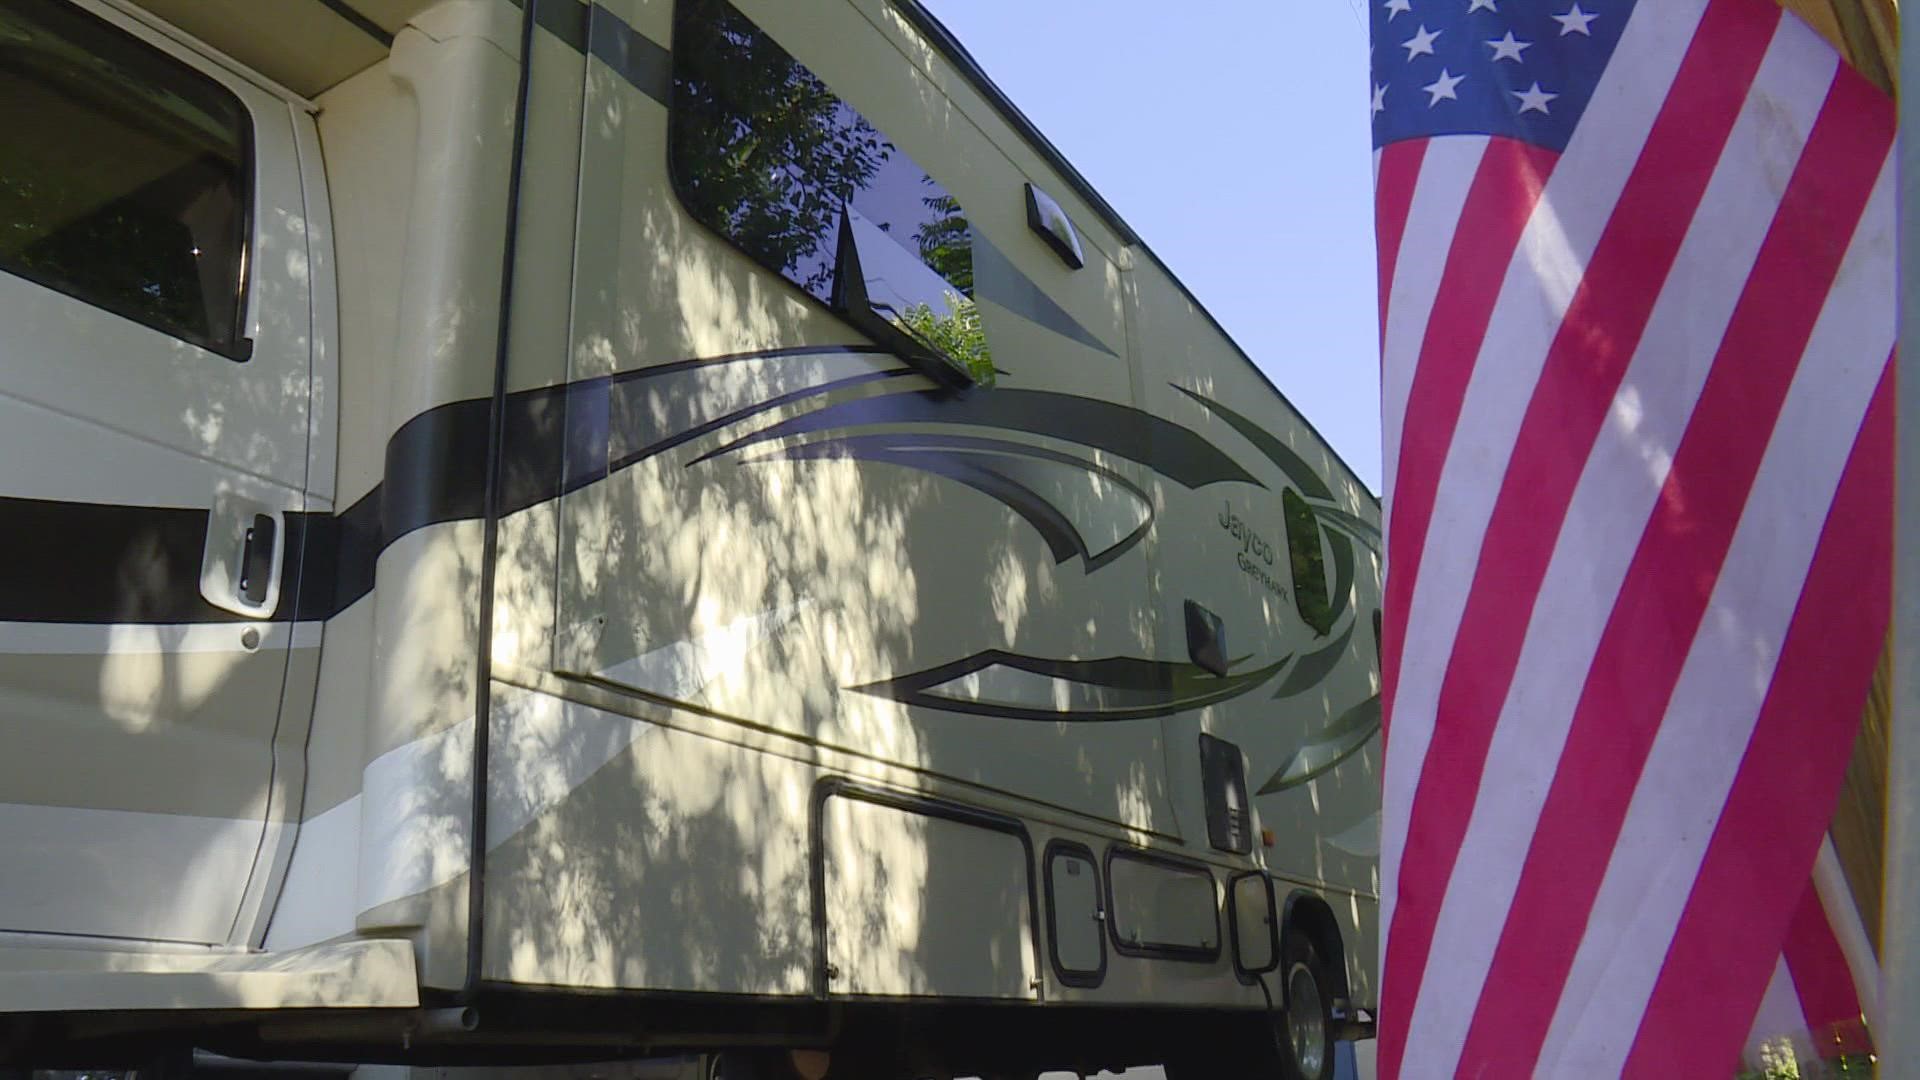 Business hasn't slowed down for a local RV rental company, though customers are booking shorter vacations.